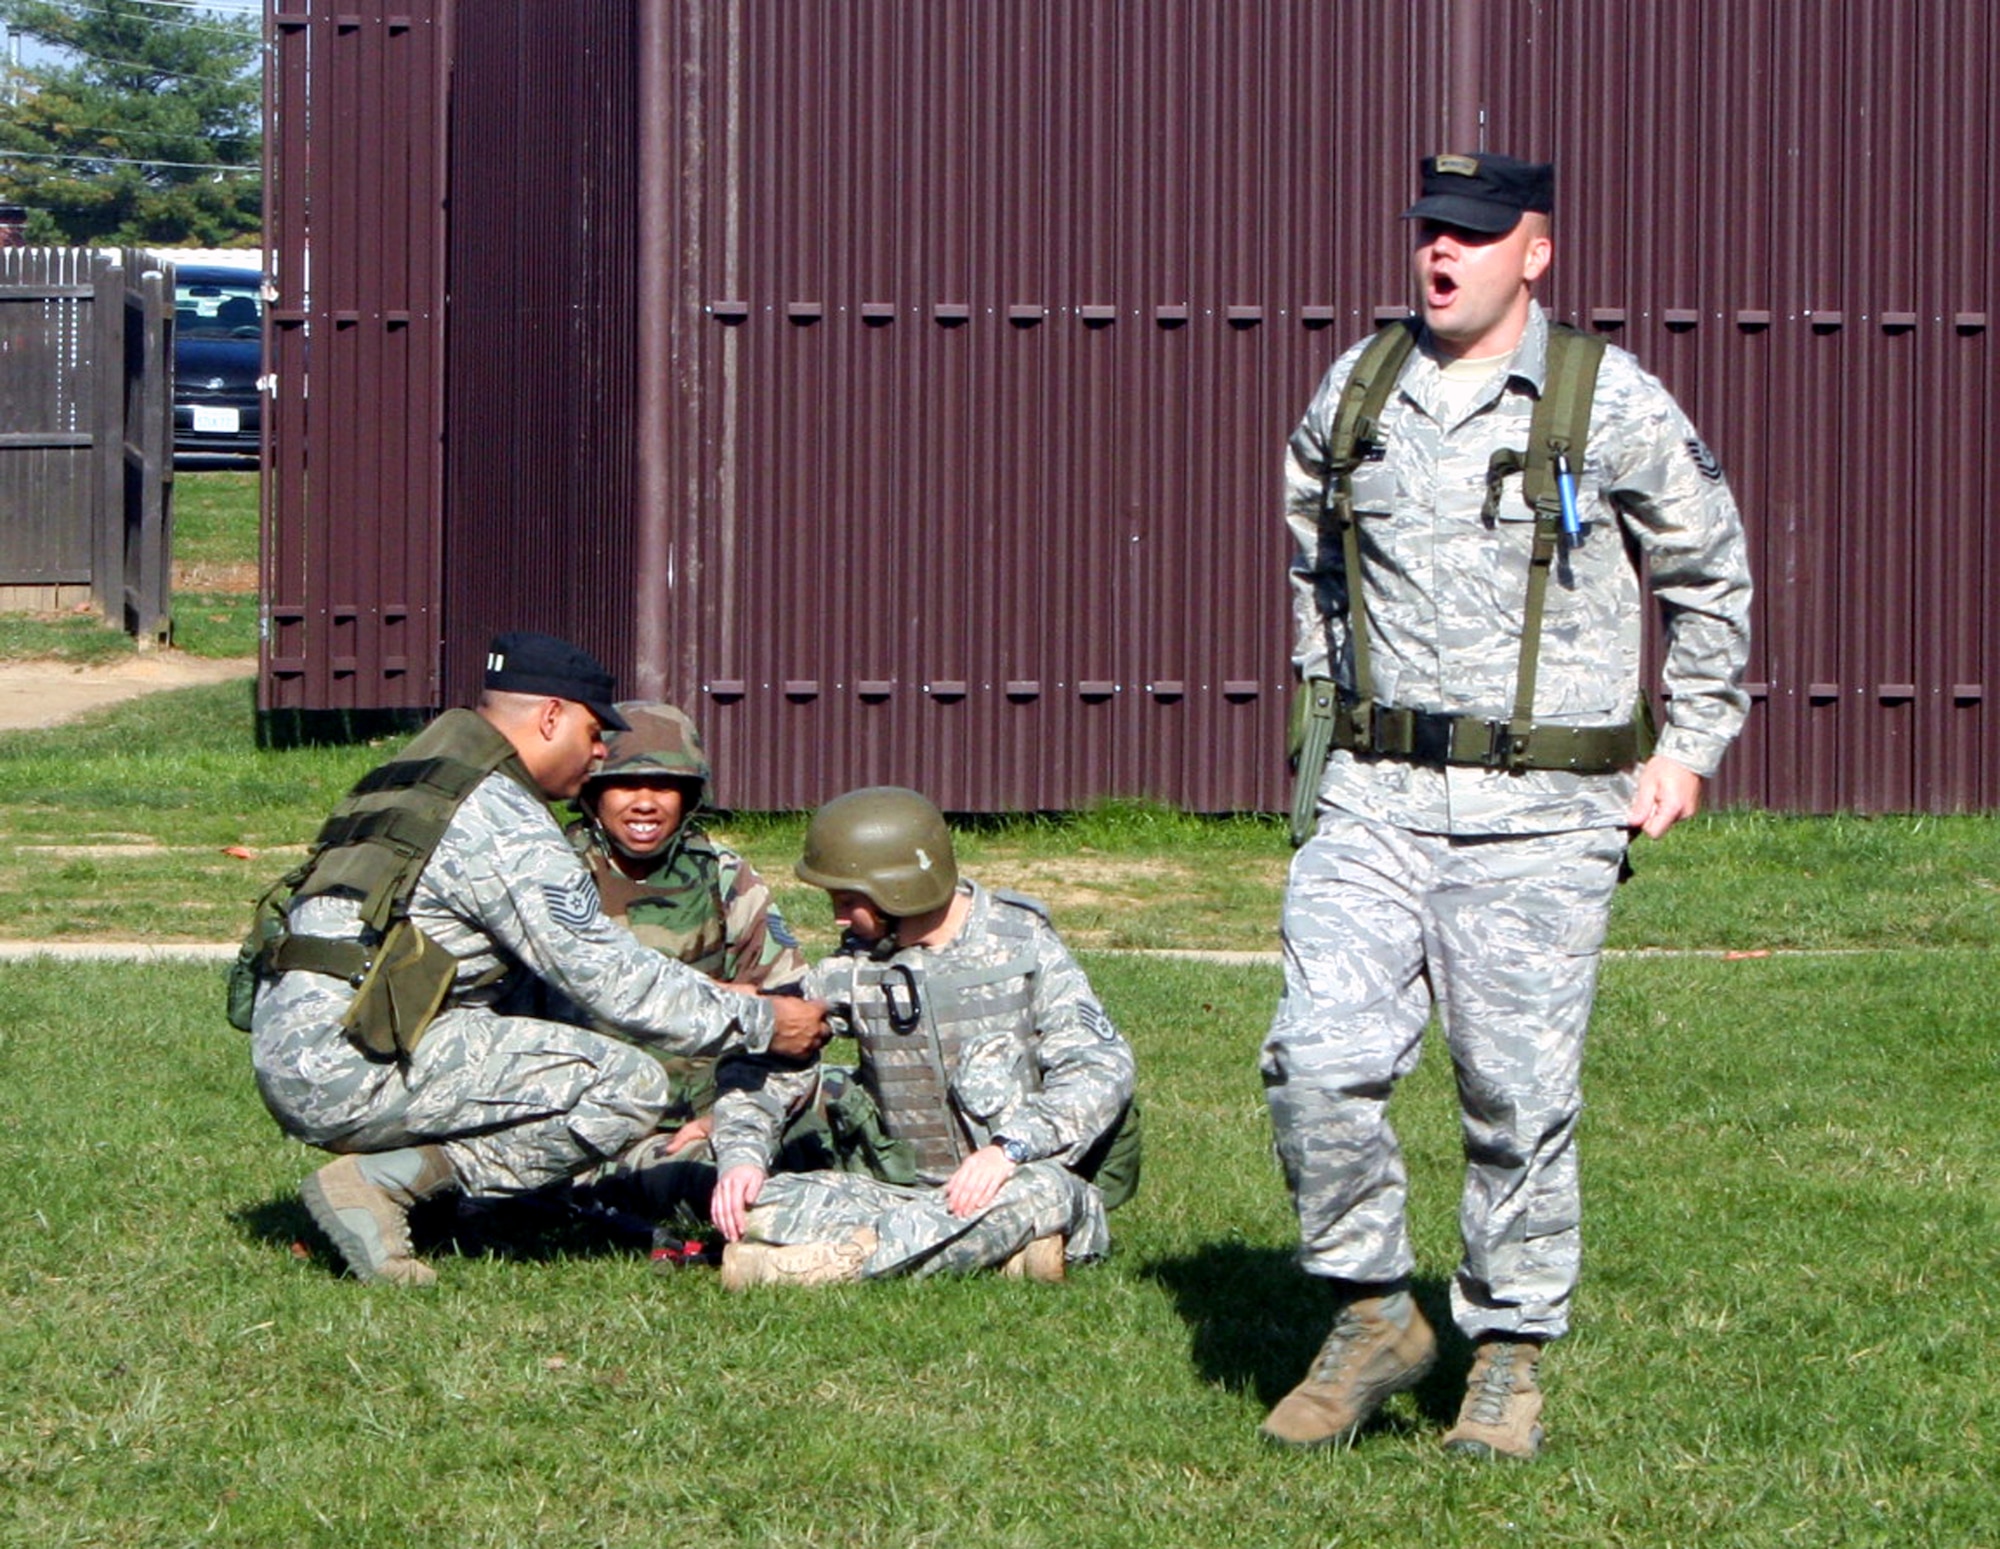 Tech. Sgt. Matt Thompson, independent duty medical technician and medical instructor for the U.S. Air Force Expeditionary Center's 421st Combat Training Squadron, teaches a session of the Care Under Fire (combat first aid) class to students in the Combat Airman Skills Training Course 10-1A on Nov. 9, 2009, at the center at Joint Base McGuire-Dix-Lakehurst, N.J.  The class focuses on combat lifesaver skills.  The CAST course trains Airmen for upcoming deployments.  (U.S. Air Force Photo/Tech. Sgt. Scott T. Sturkol)